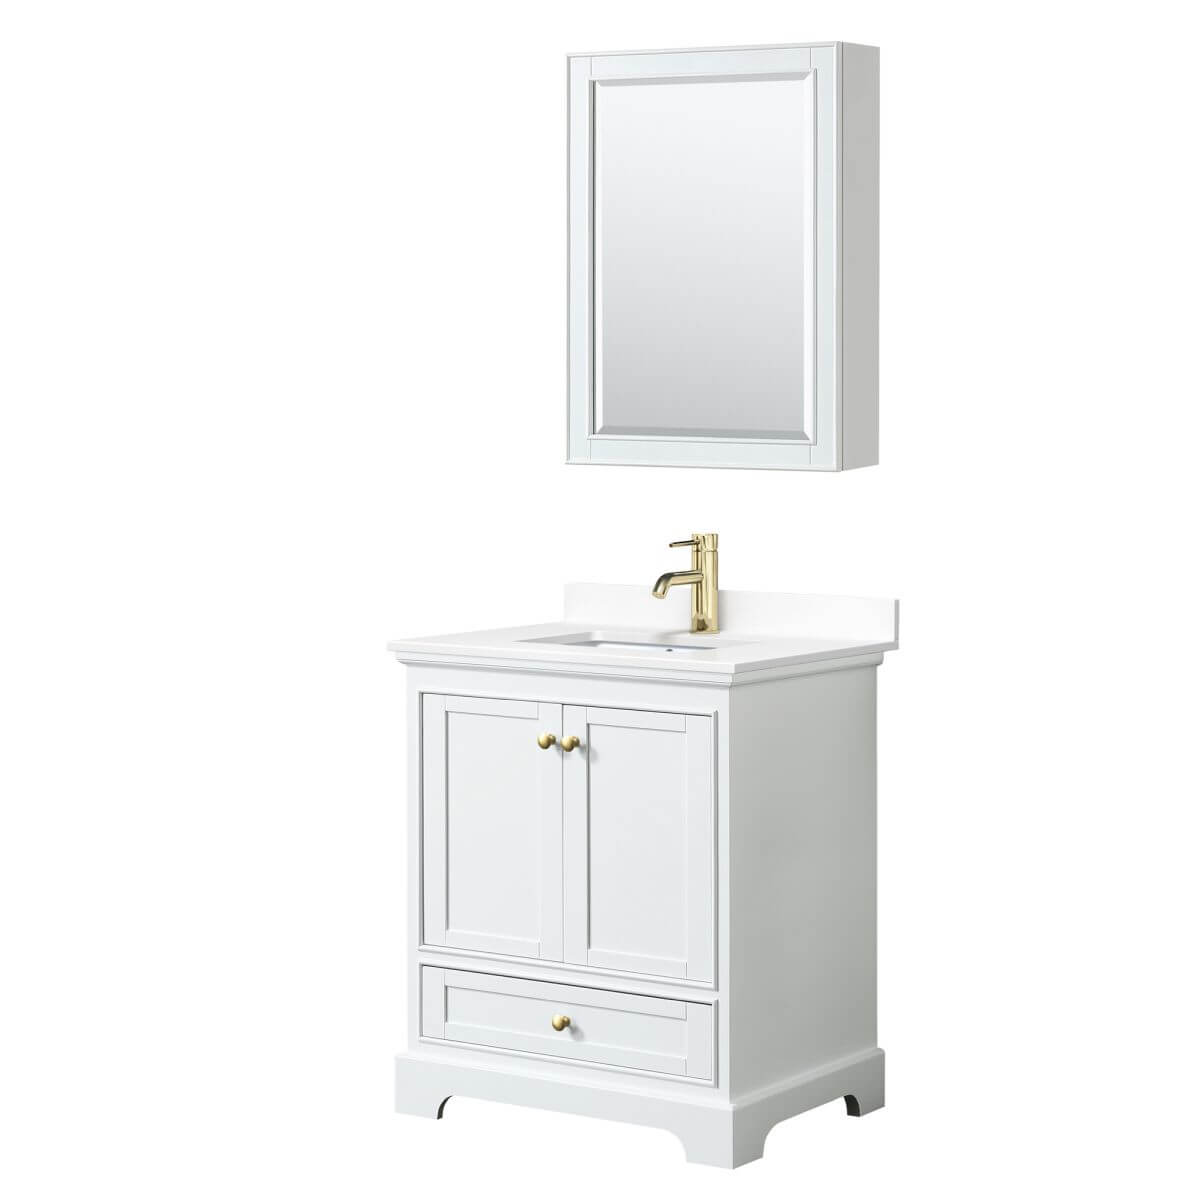 Wyndham Collection Deborah 30 inch Single Bathroom Vanity in White with White Cultured Marble Countertop, Undermount Square Sink, Brushed Gold Trim and Medicine Cabinet - WCS202030SWGWCUNSMED